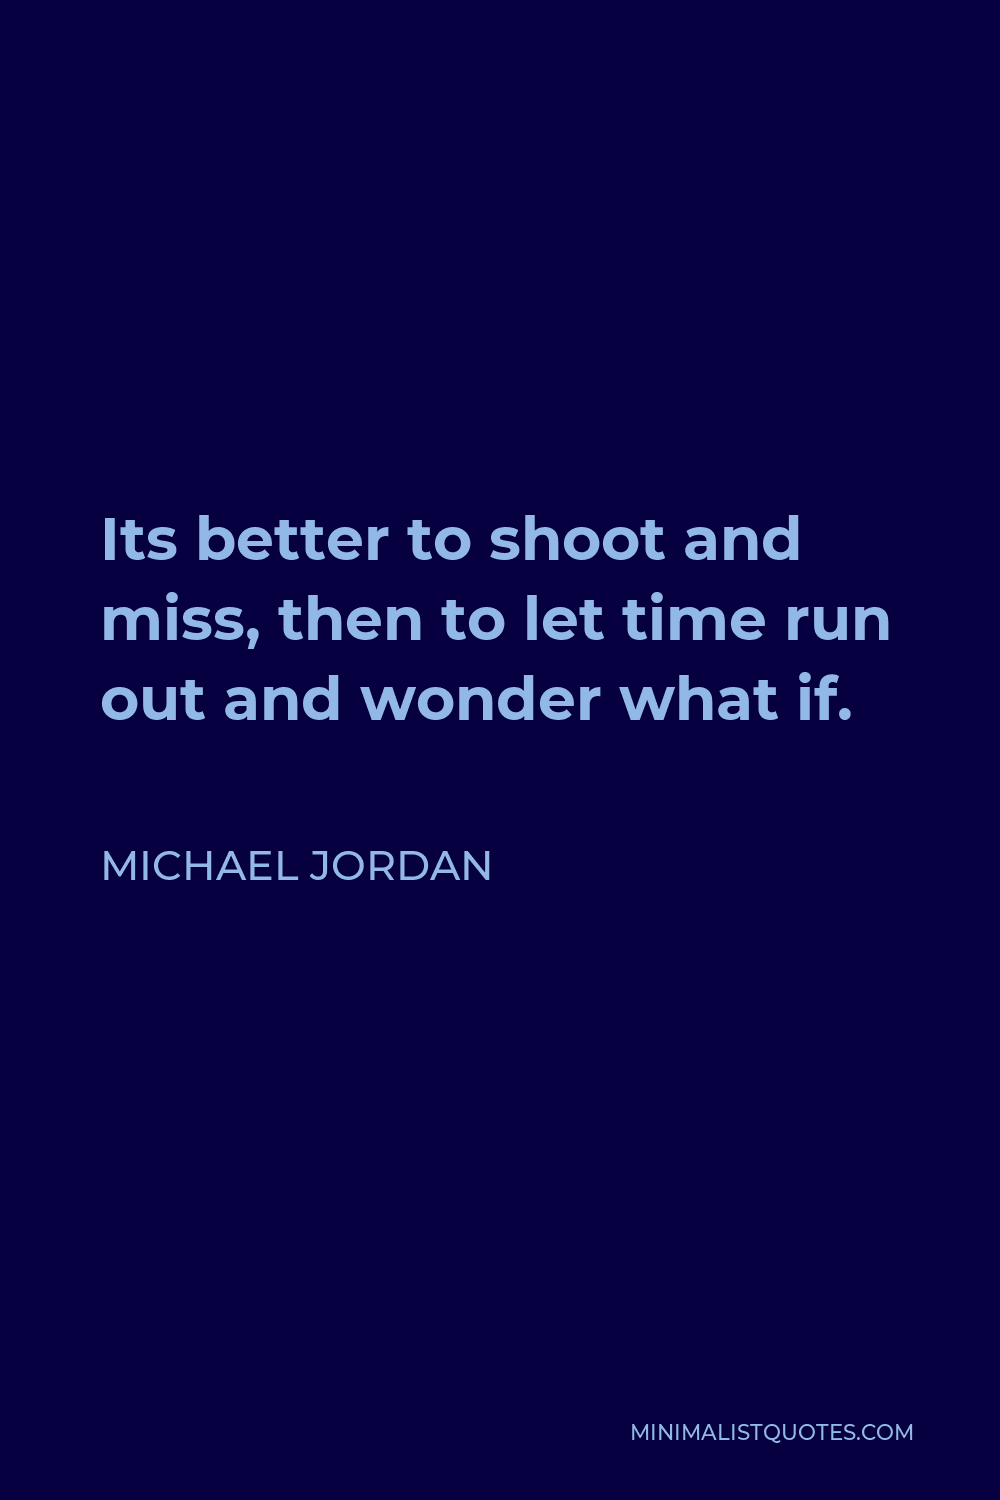 Michael Jordan Quote - Its better to shoot and miss, then to let time run out and wonder what if.